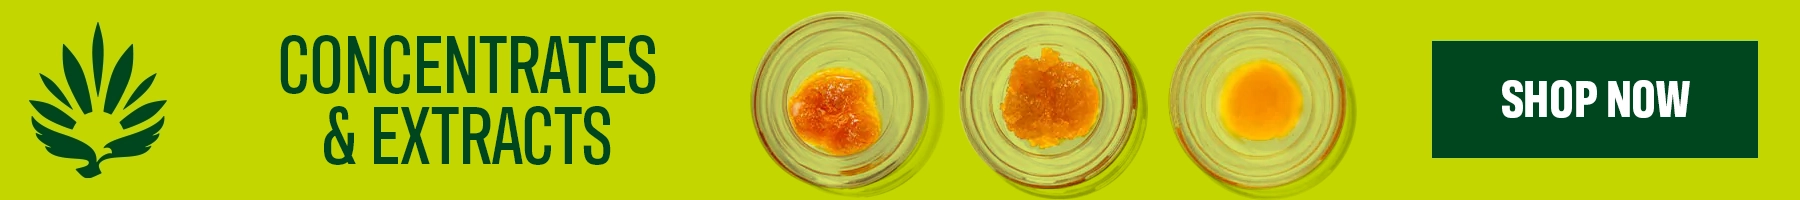 CONCENTRATES & EXTRACTS